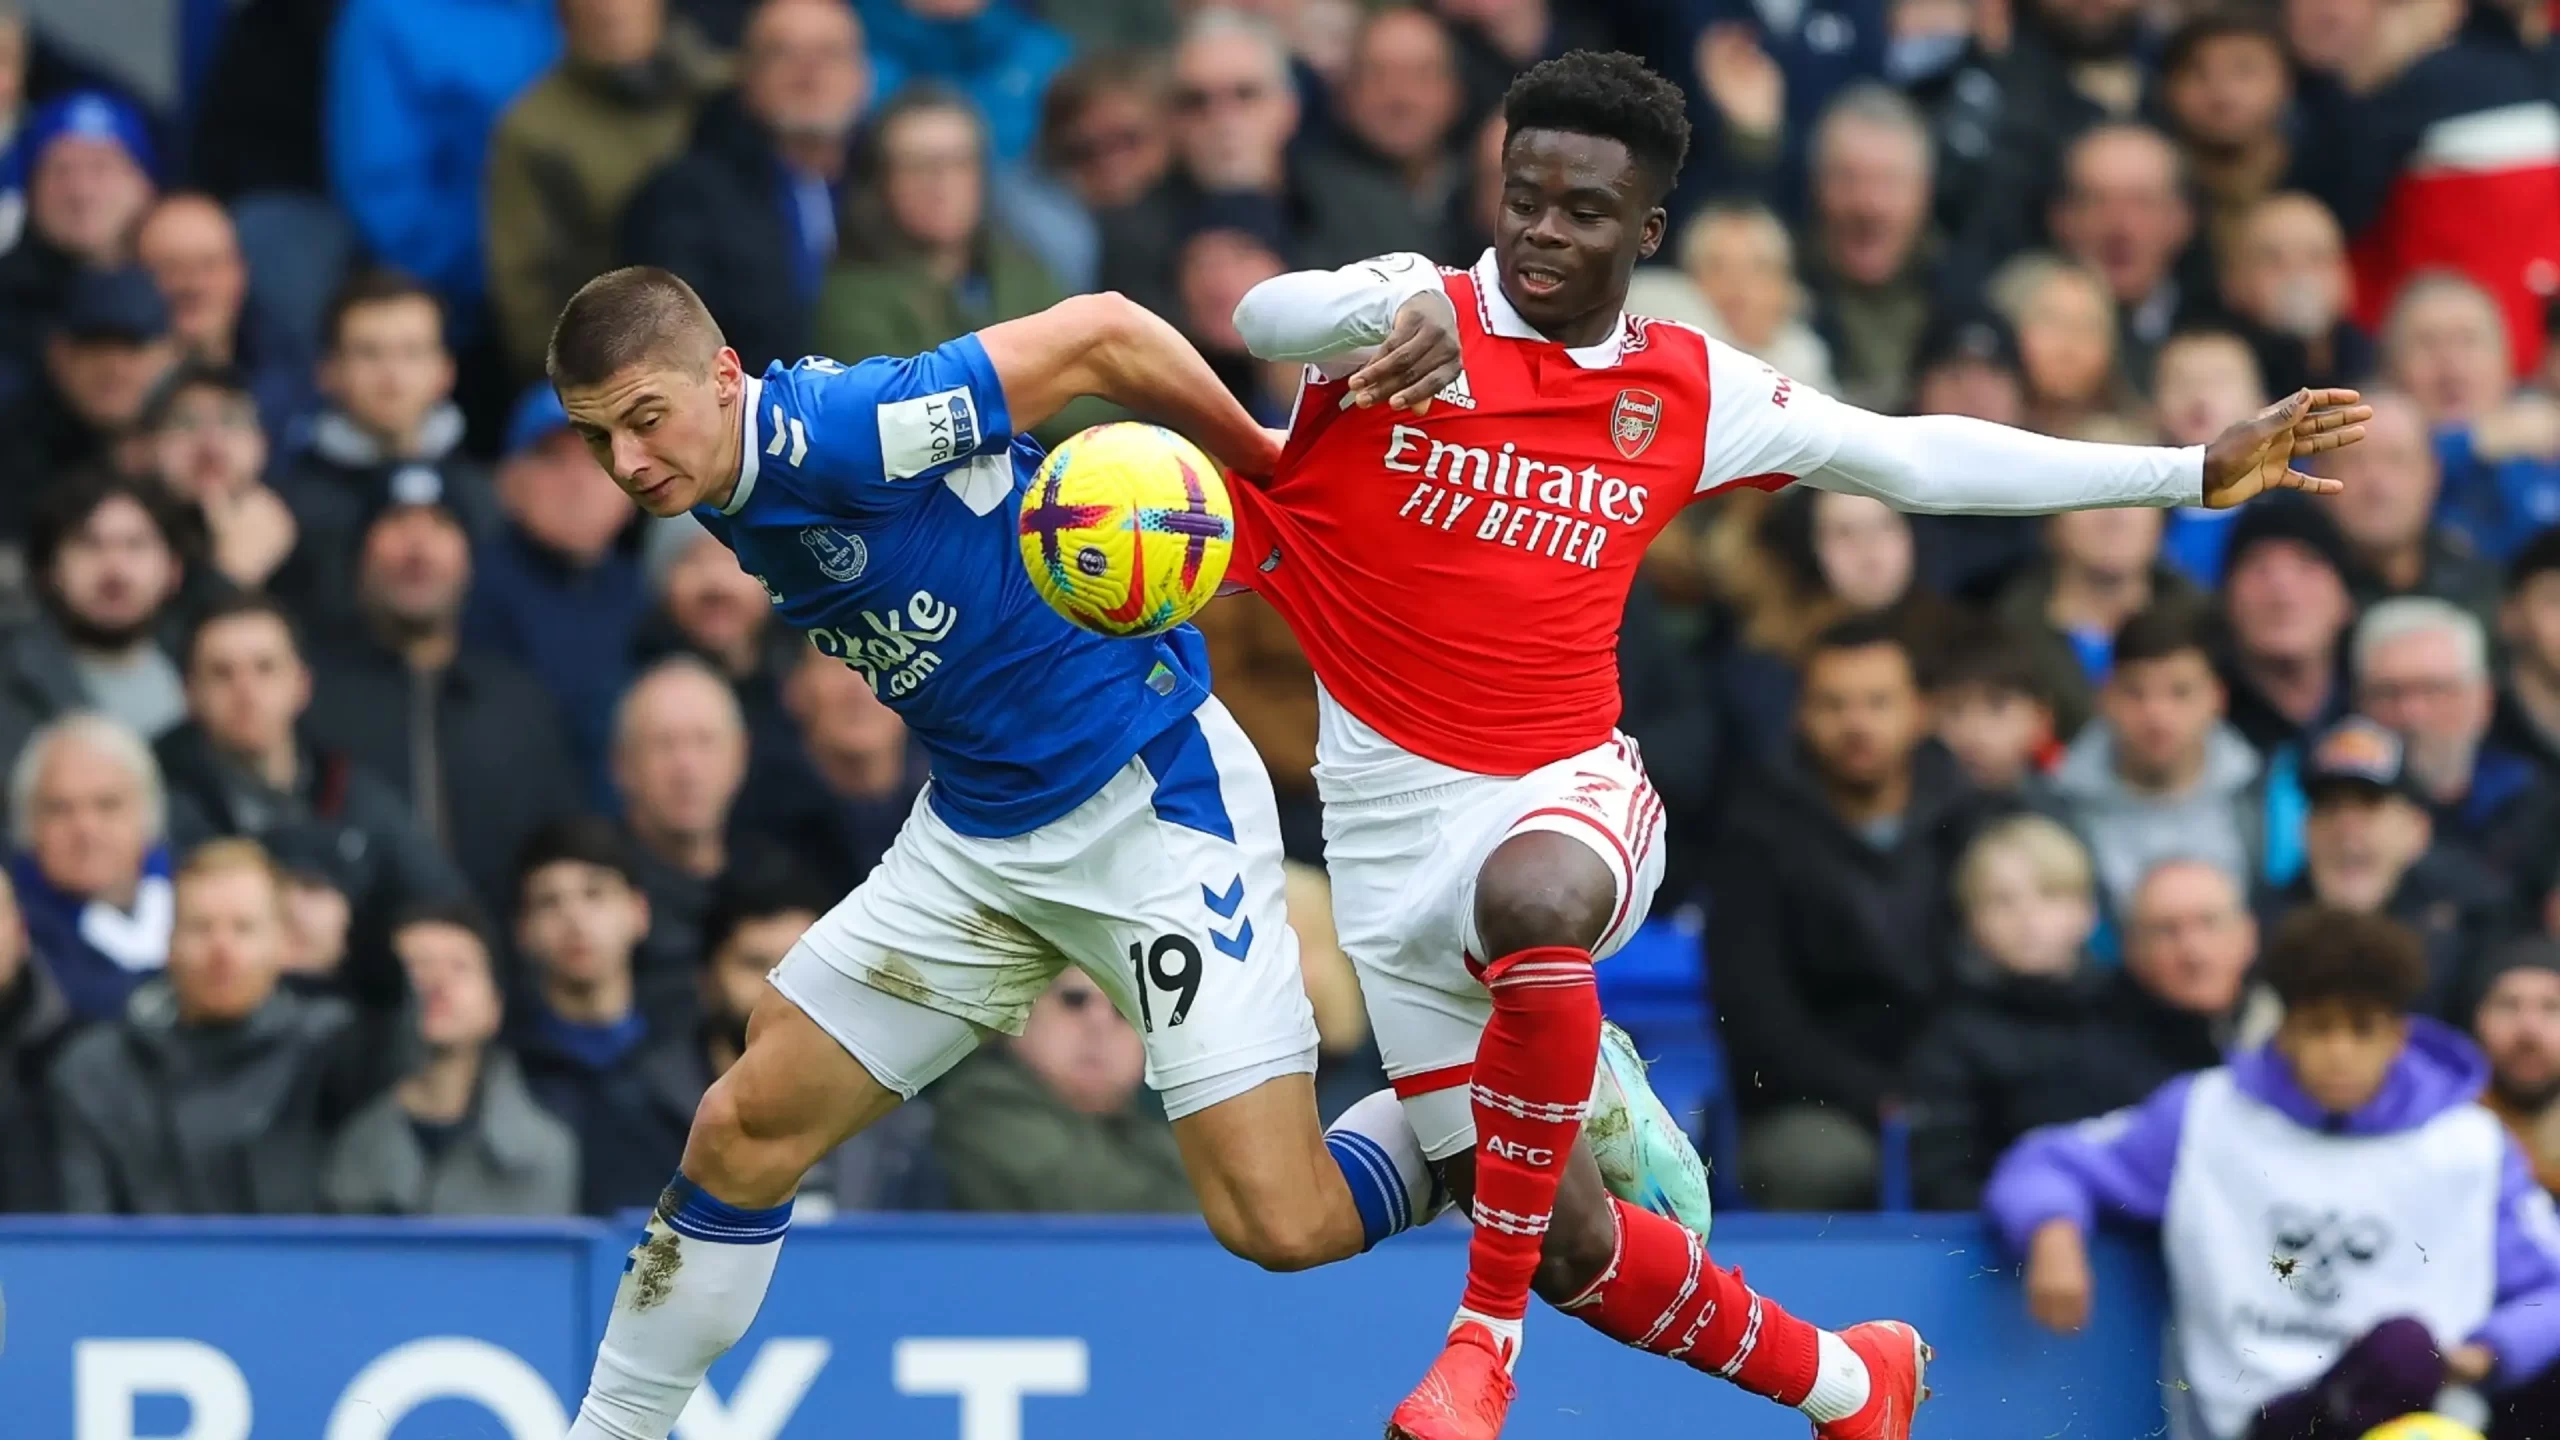 Everton vs Arsenal game to be televised live in the UK